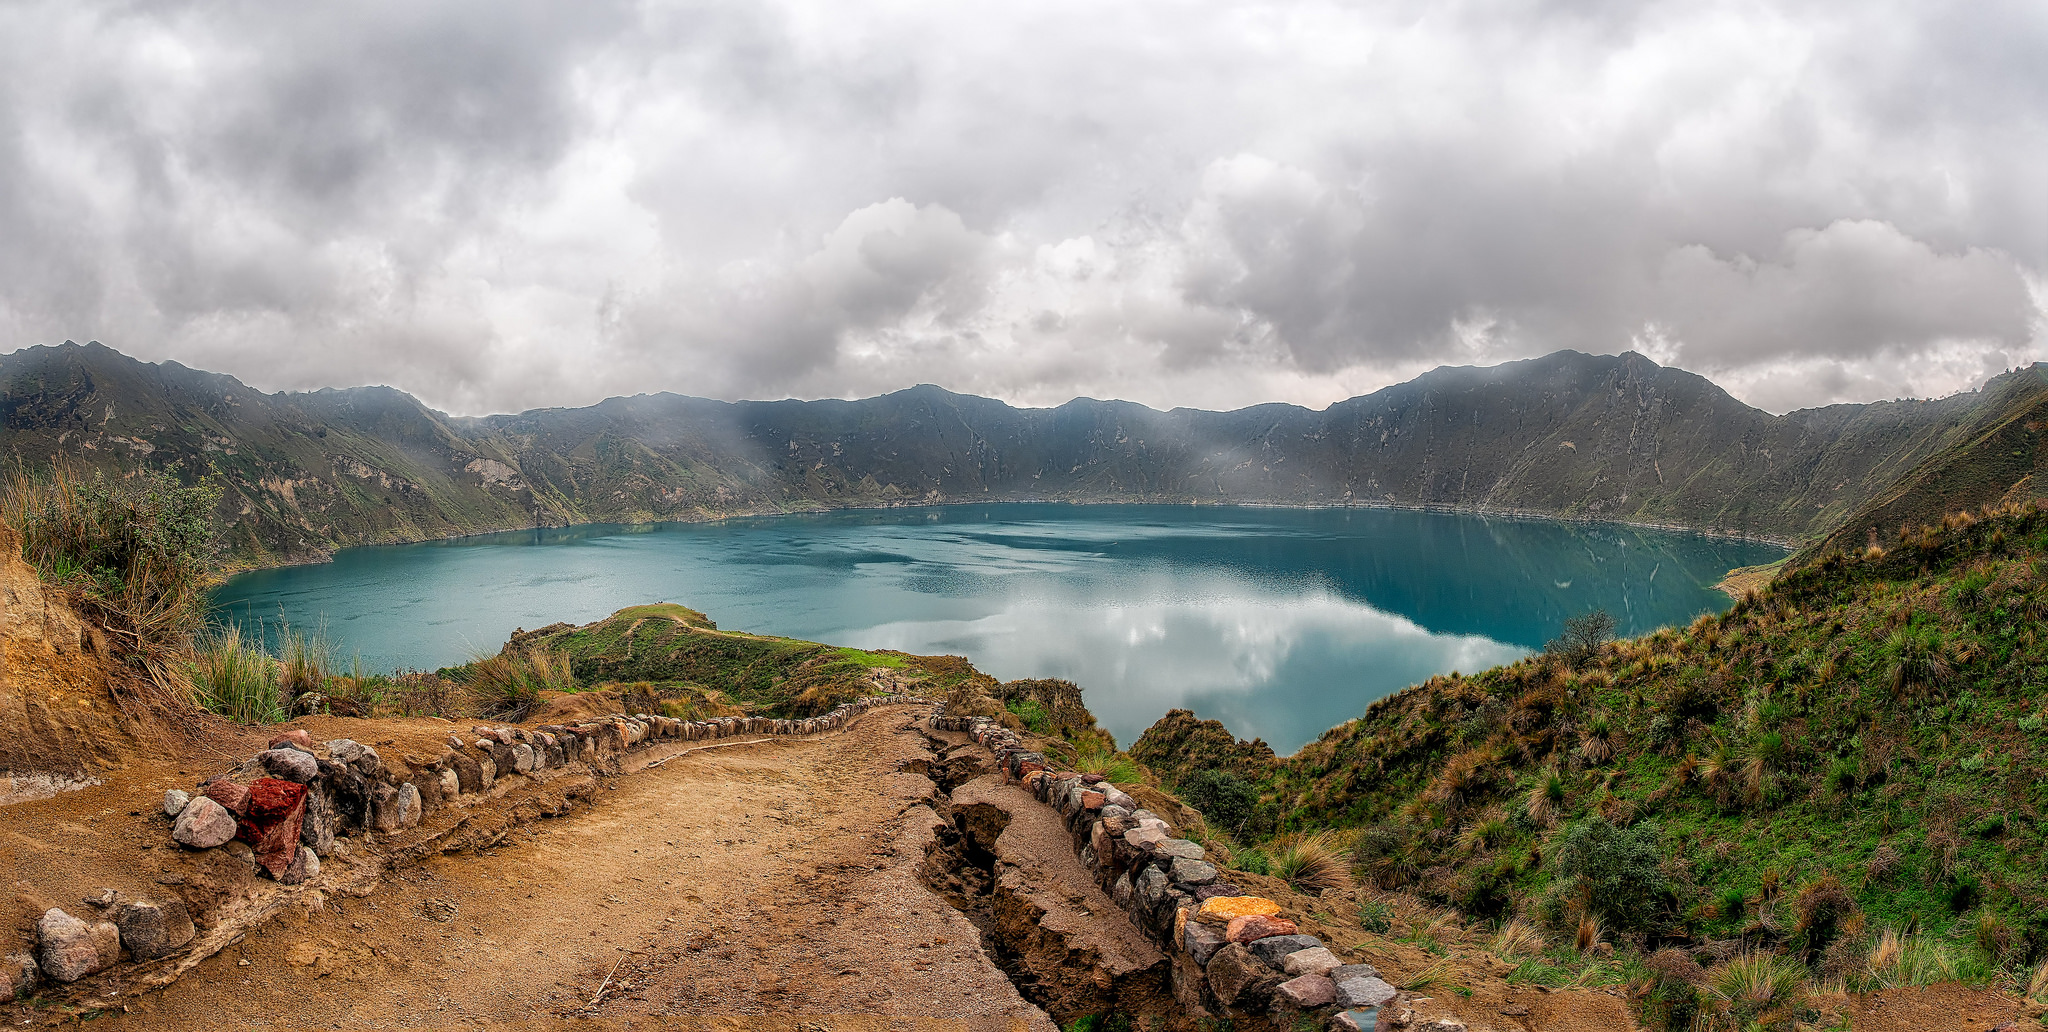 Quilotoa is the most western volcano in the Ecuadorian Andes. Photo credit